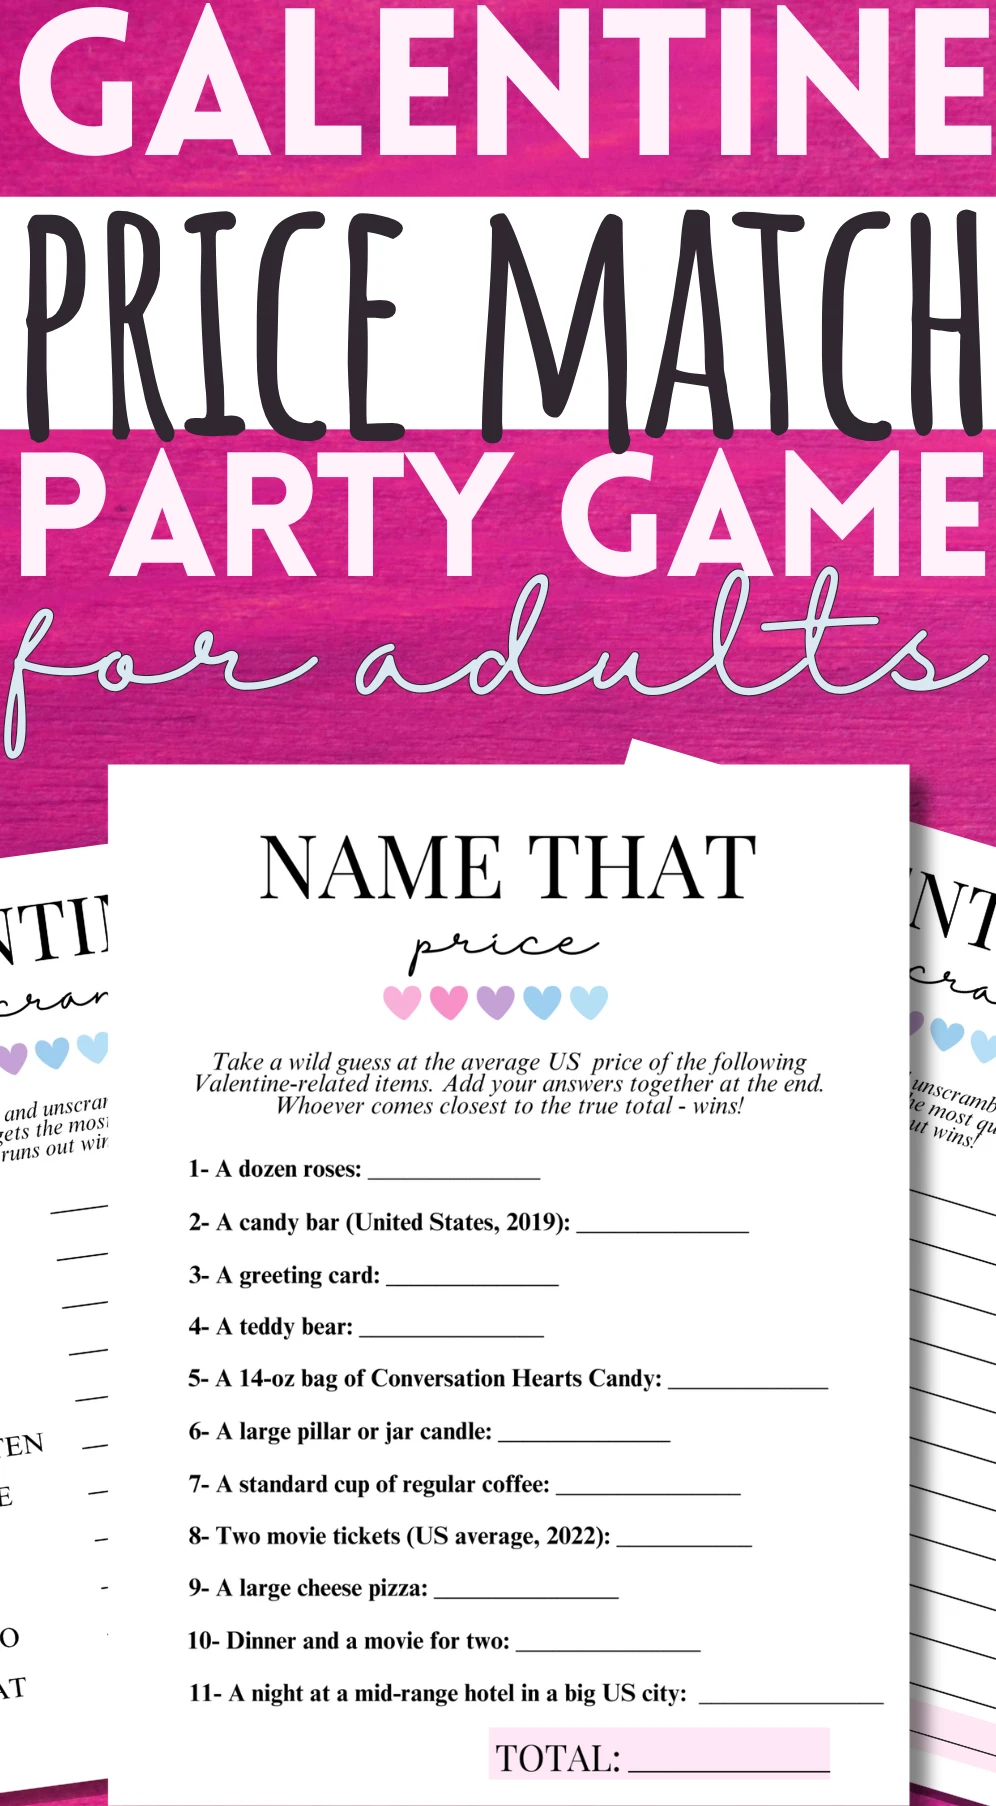 galentine price match party game